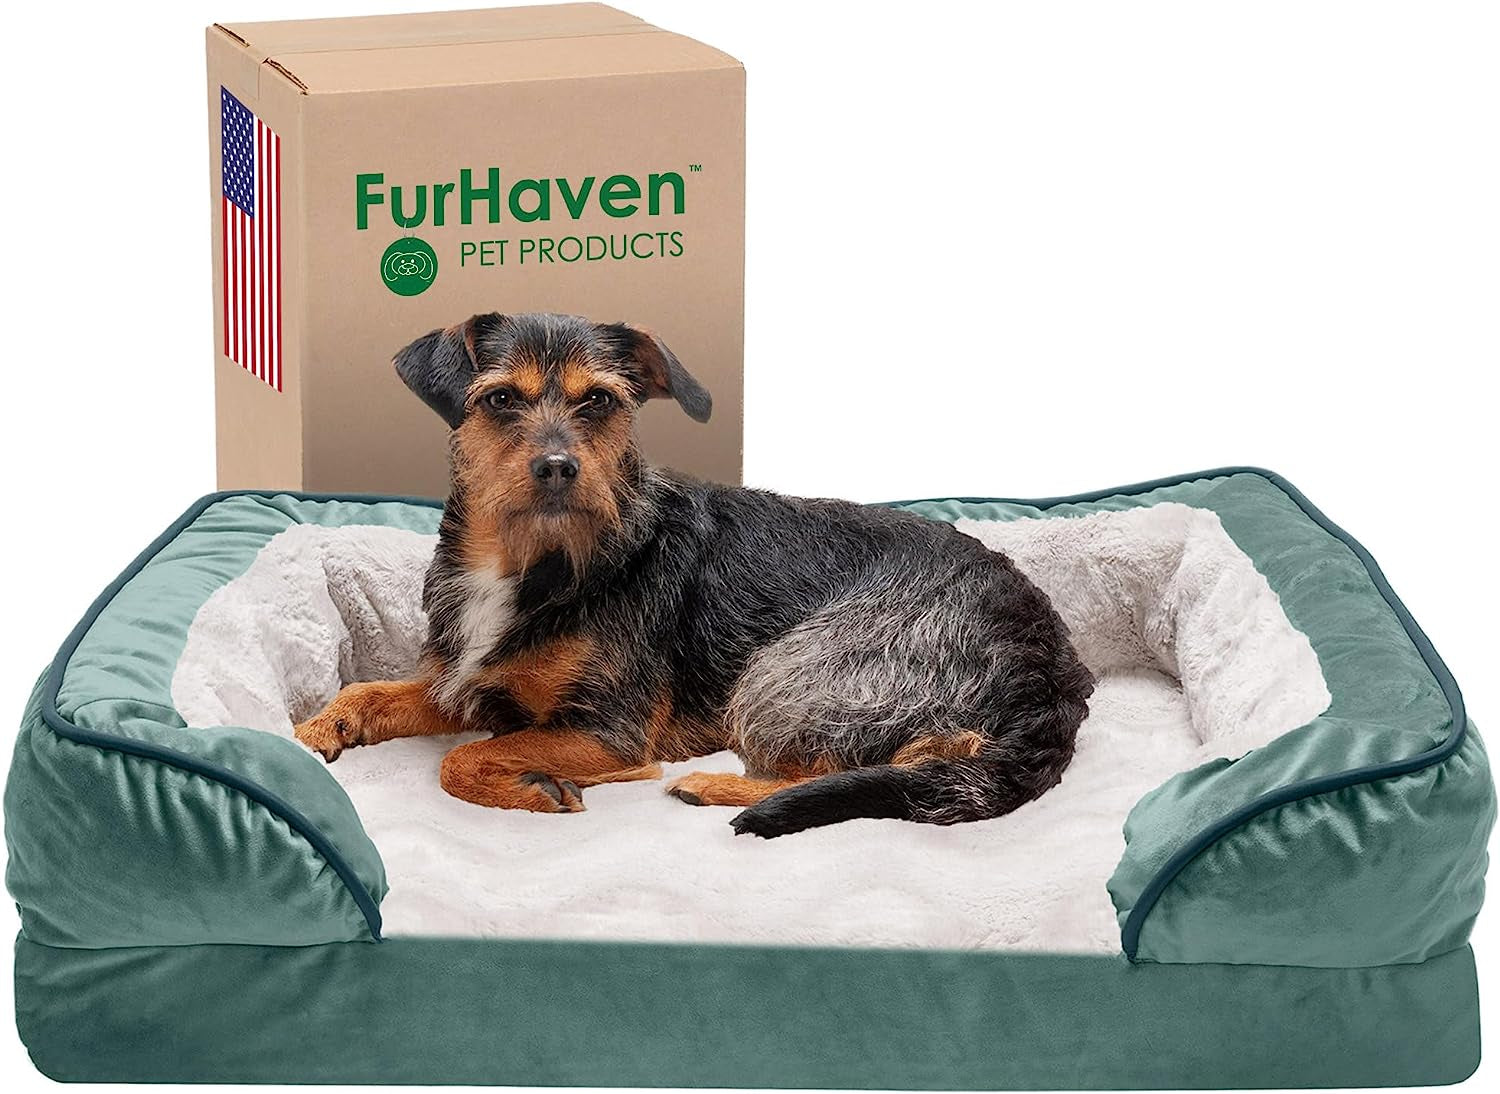 Pet Bed for Dogs and Cats - Plush and Velvet Waves Perfect Comfort Sofa-Style Memory Foam Dog Bed, Removable Machine Washable Cover - Celadon Green, Medium